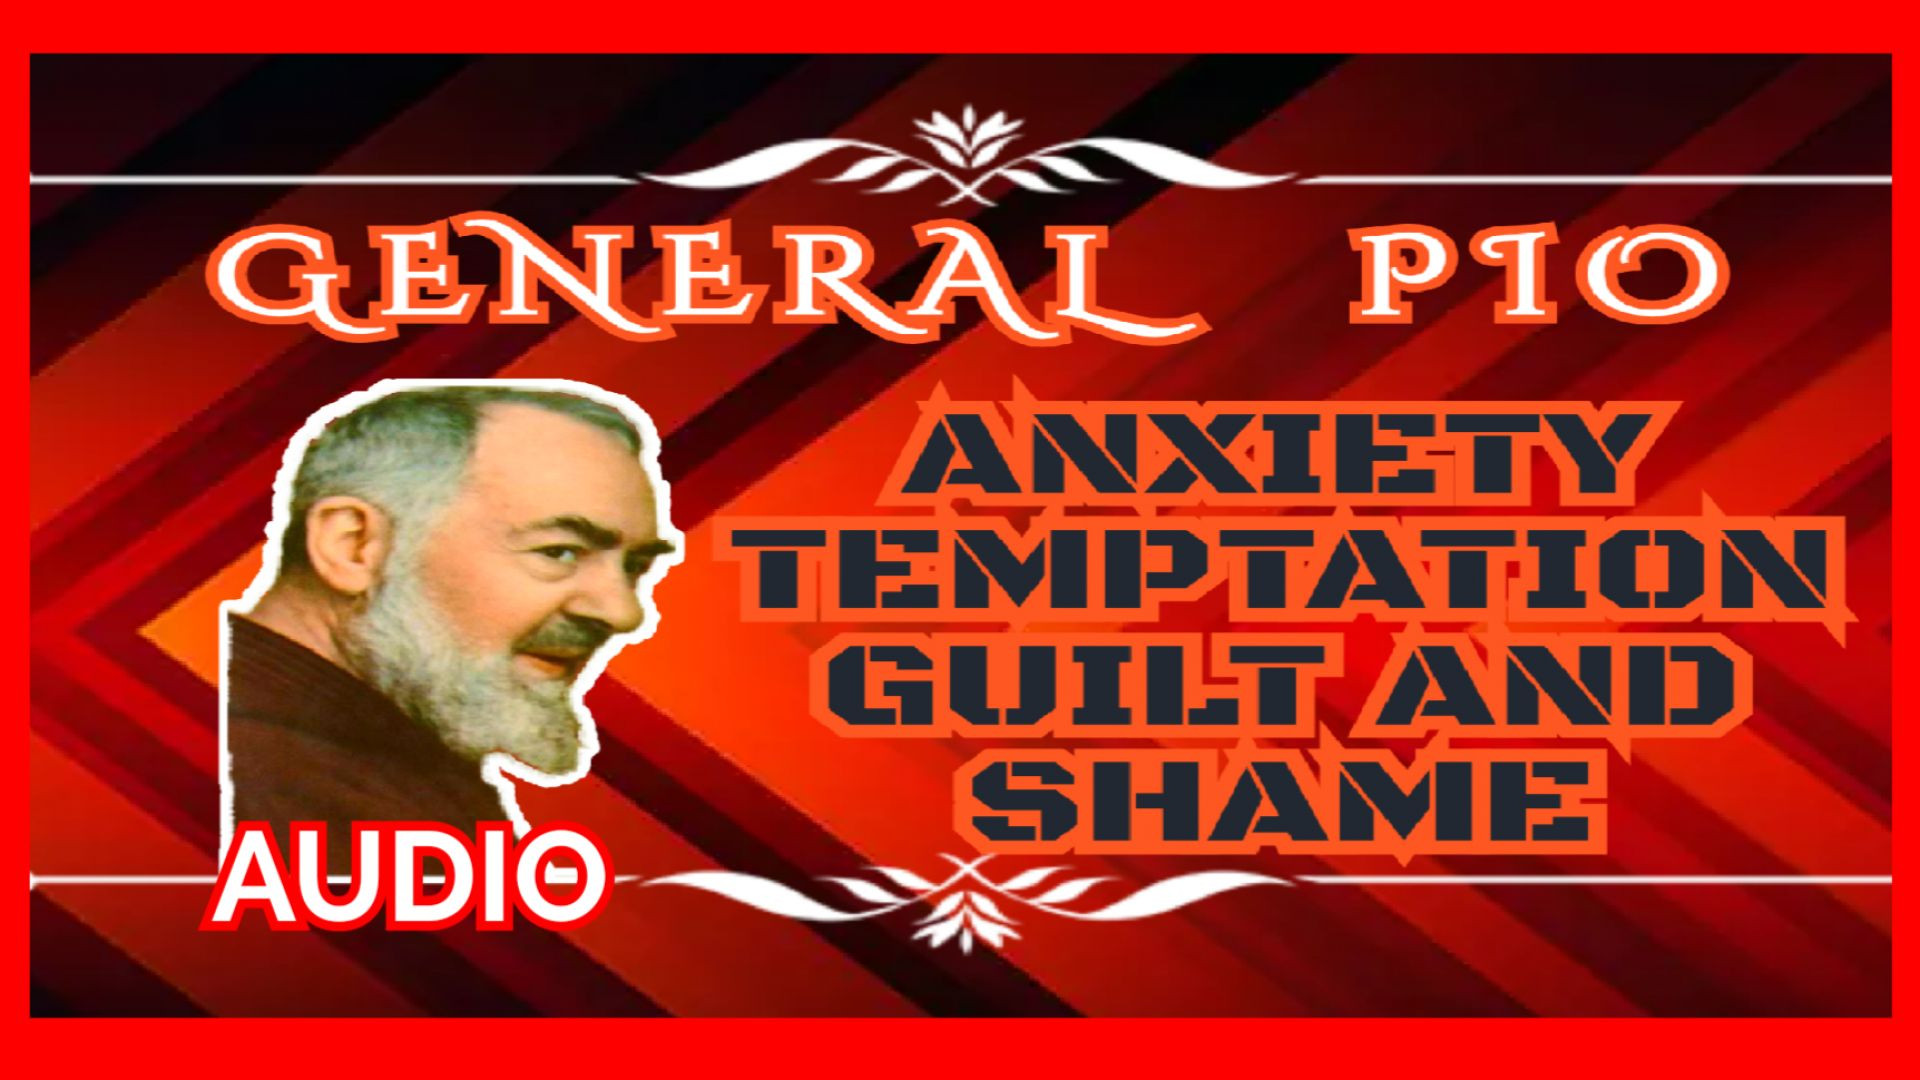 ⁣PADRE PIO ON ANXIETY TEMPTATION, GUILT AND SHAME - (audio)